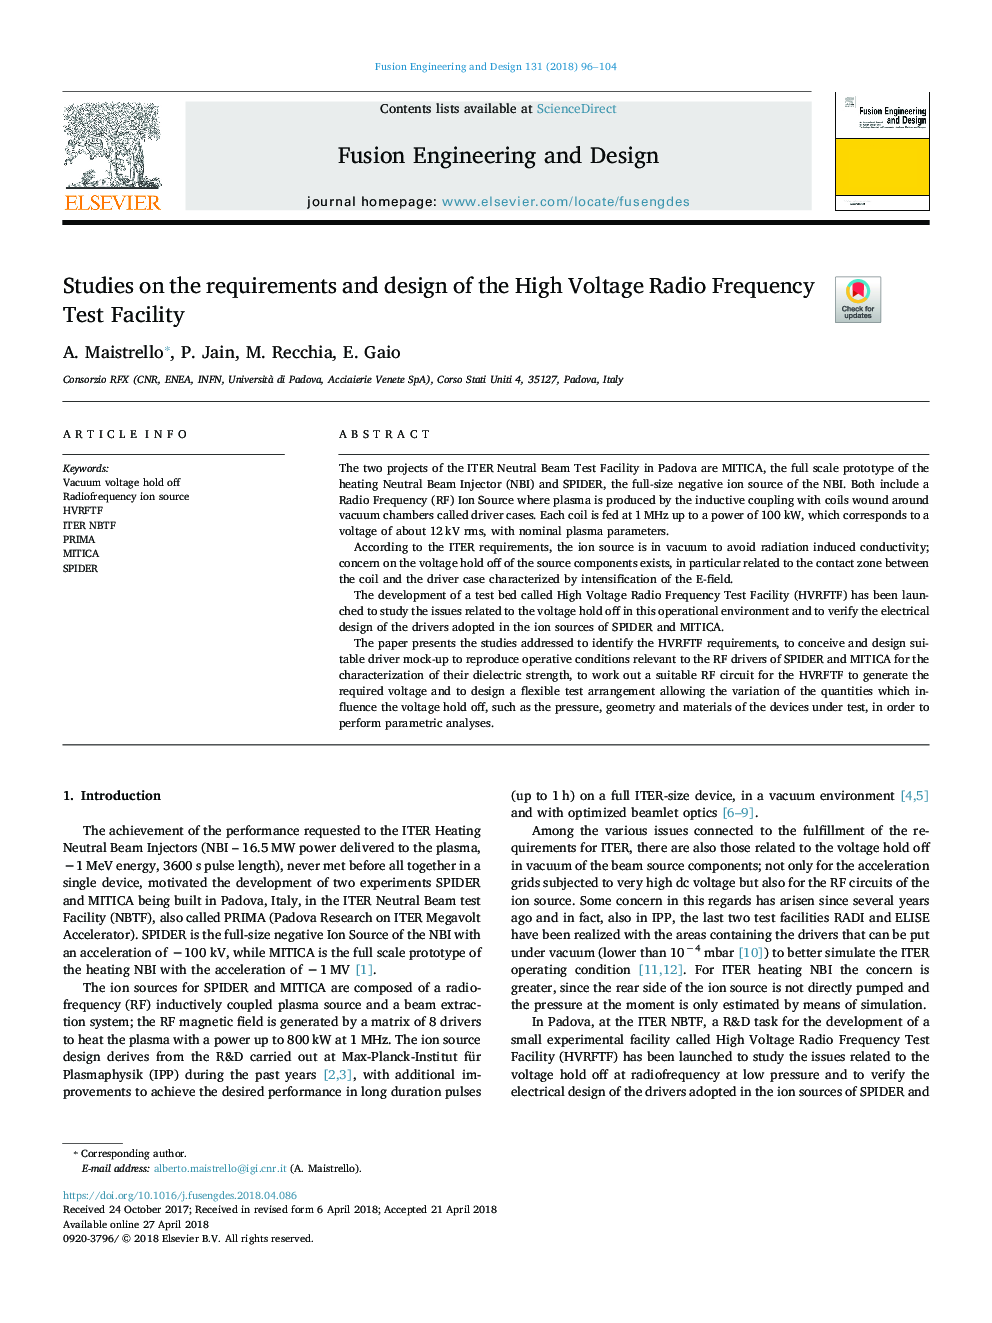 Studies on the requirements and design of the High Voltage Radio Frequency Test Facility